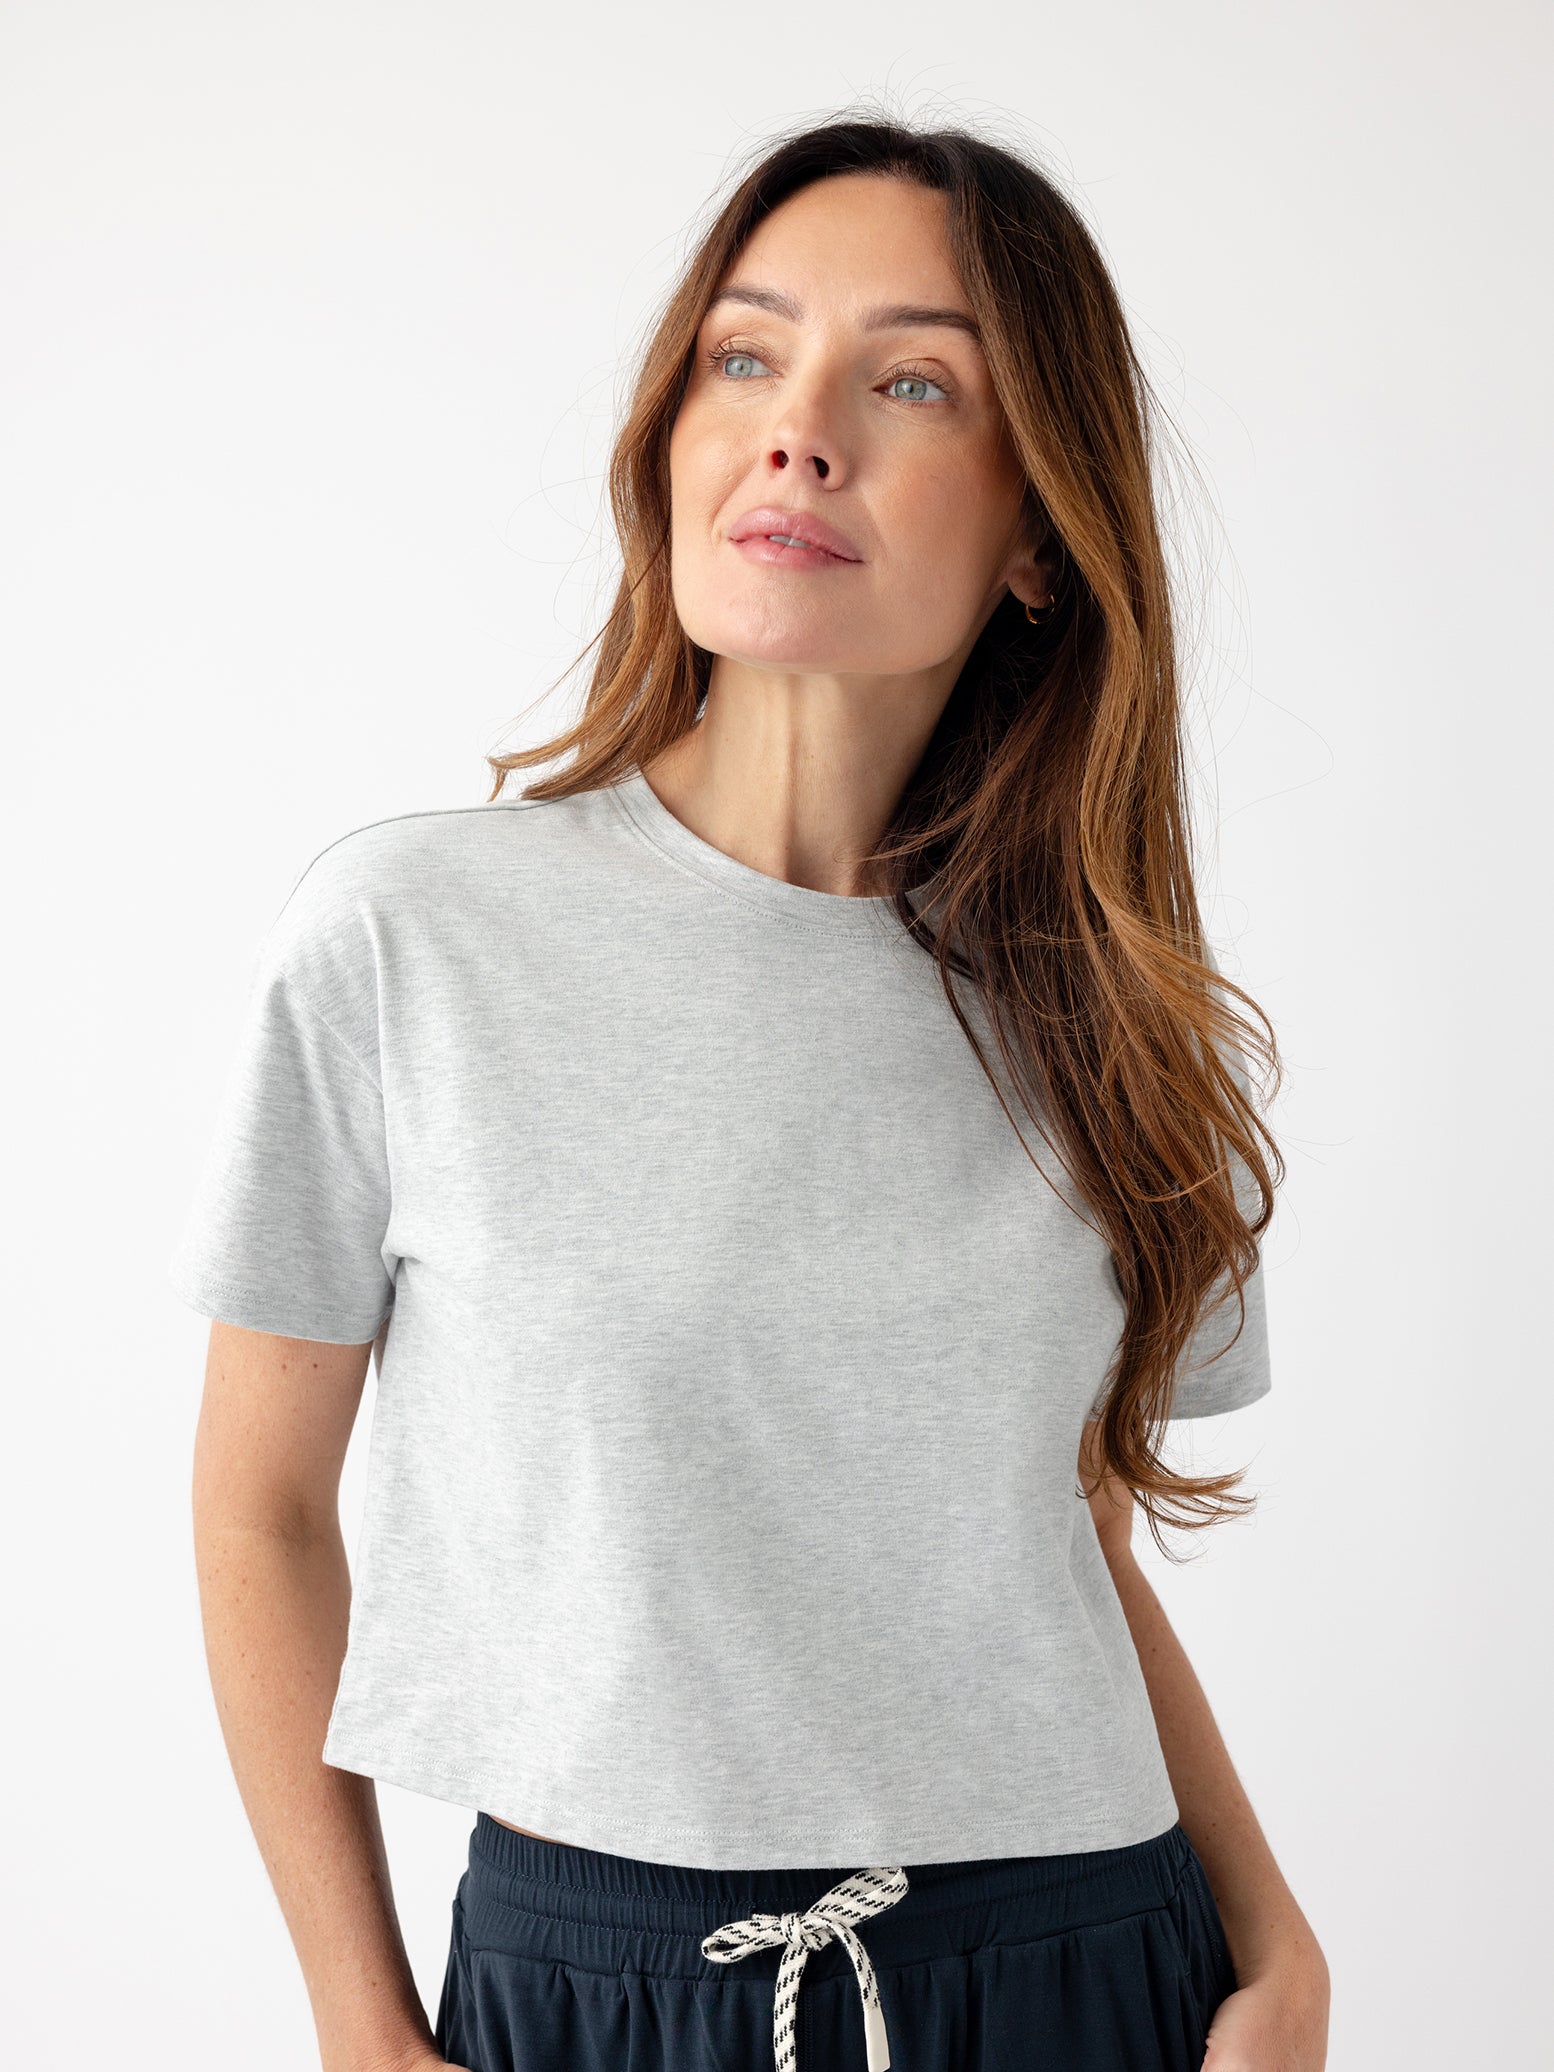 French Dove Heather All Day Cropped Tee. The photo of the All Day Cropped Tee is taken with a with a white background and is worn by a woman. |Color:French Dove Heather